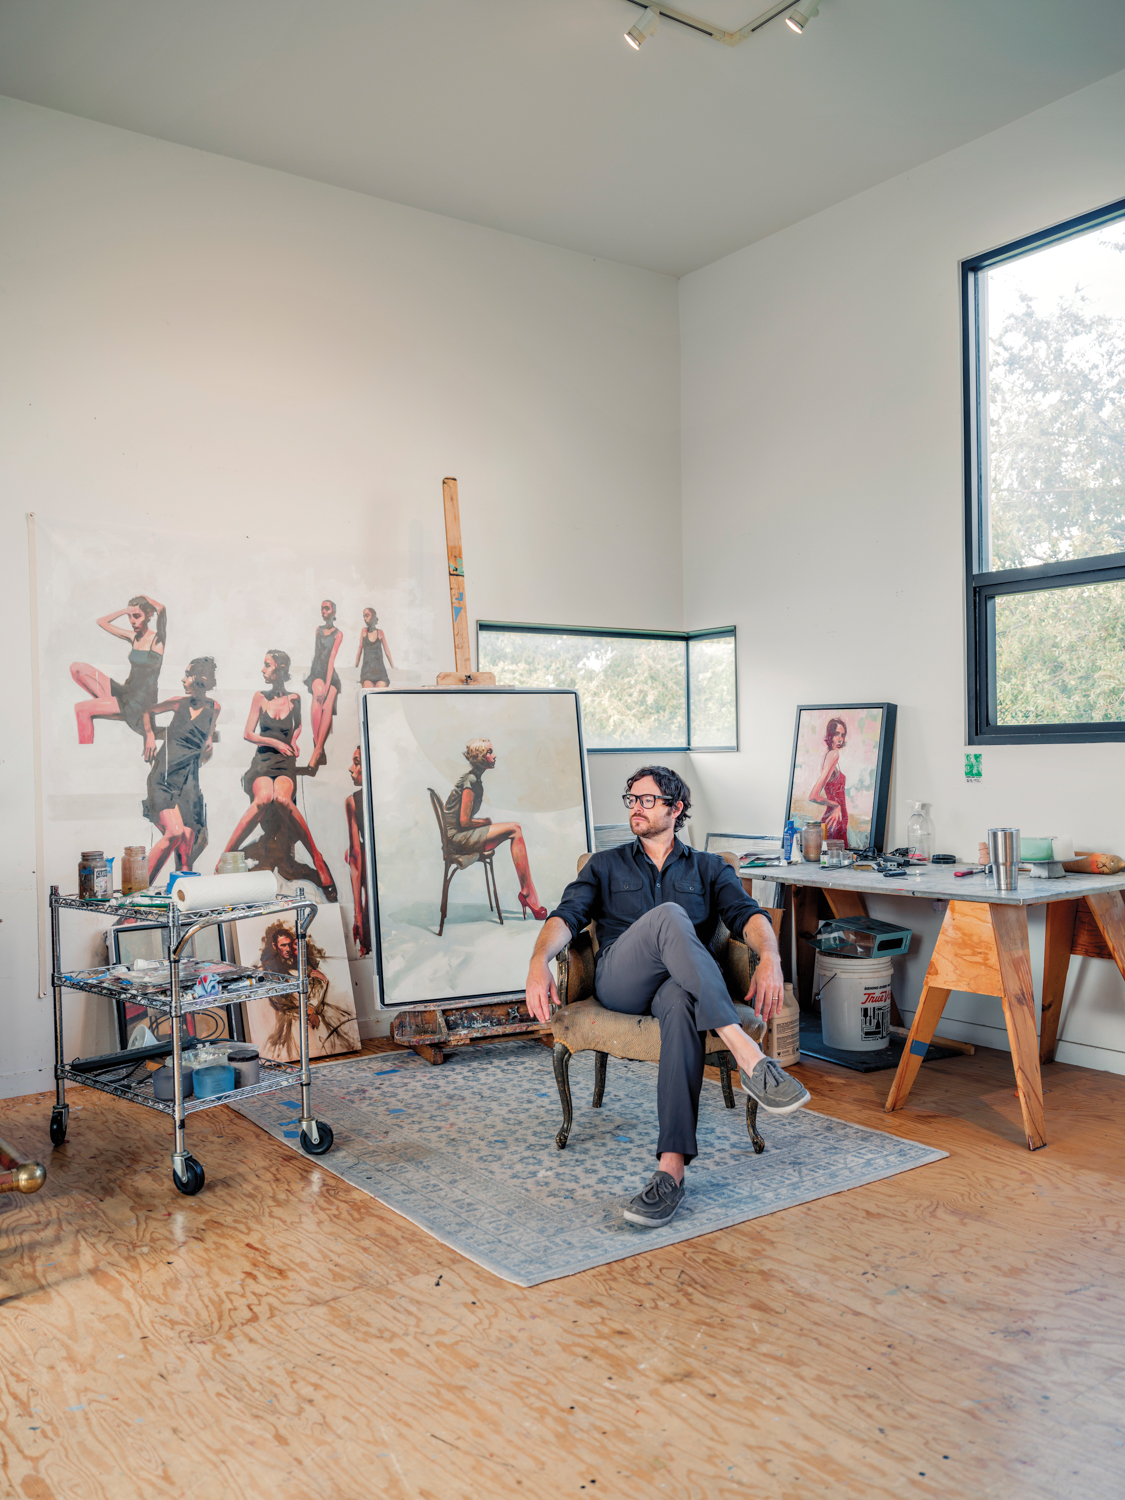 man sitting in chair surrounded by artwork and art supplies